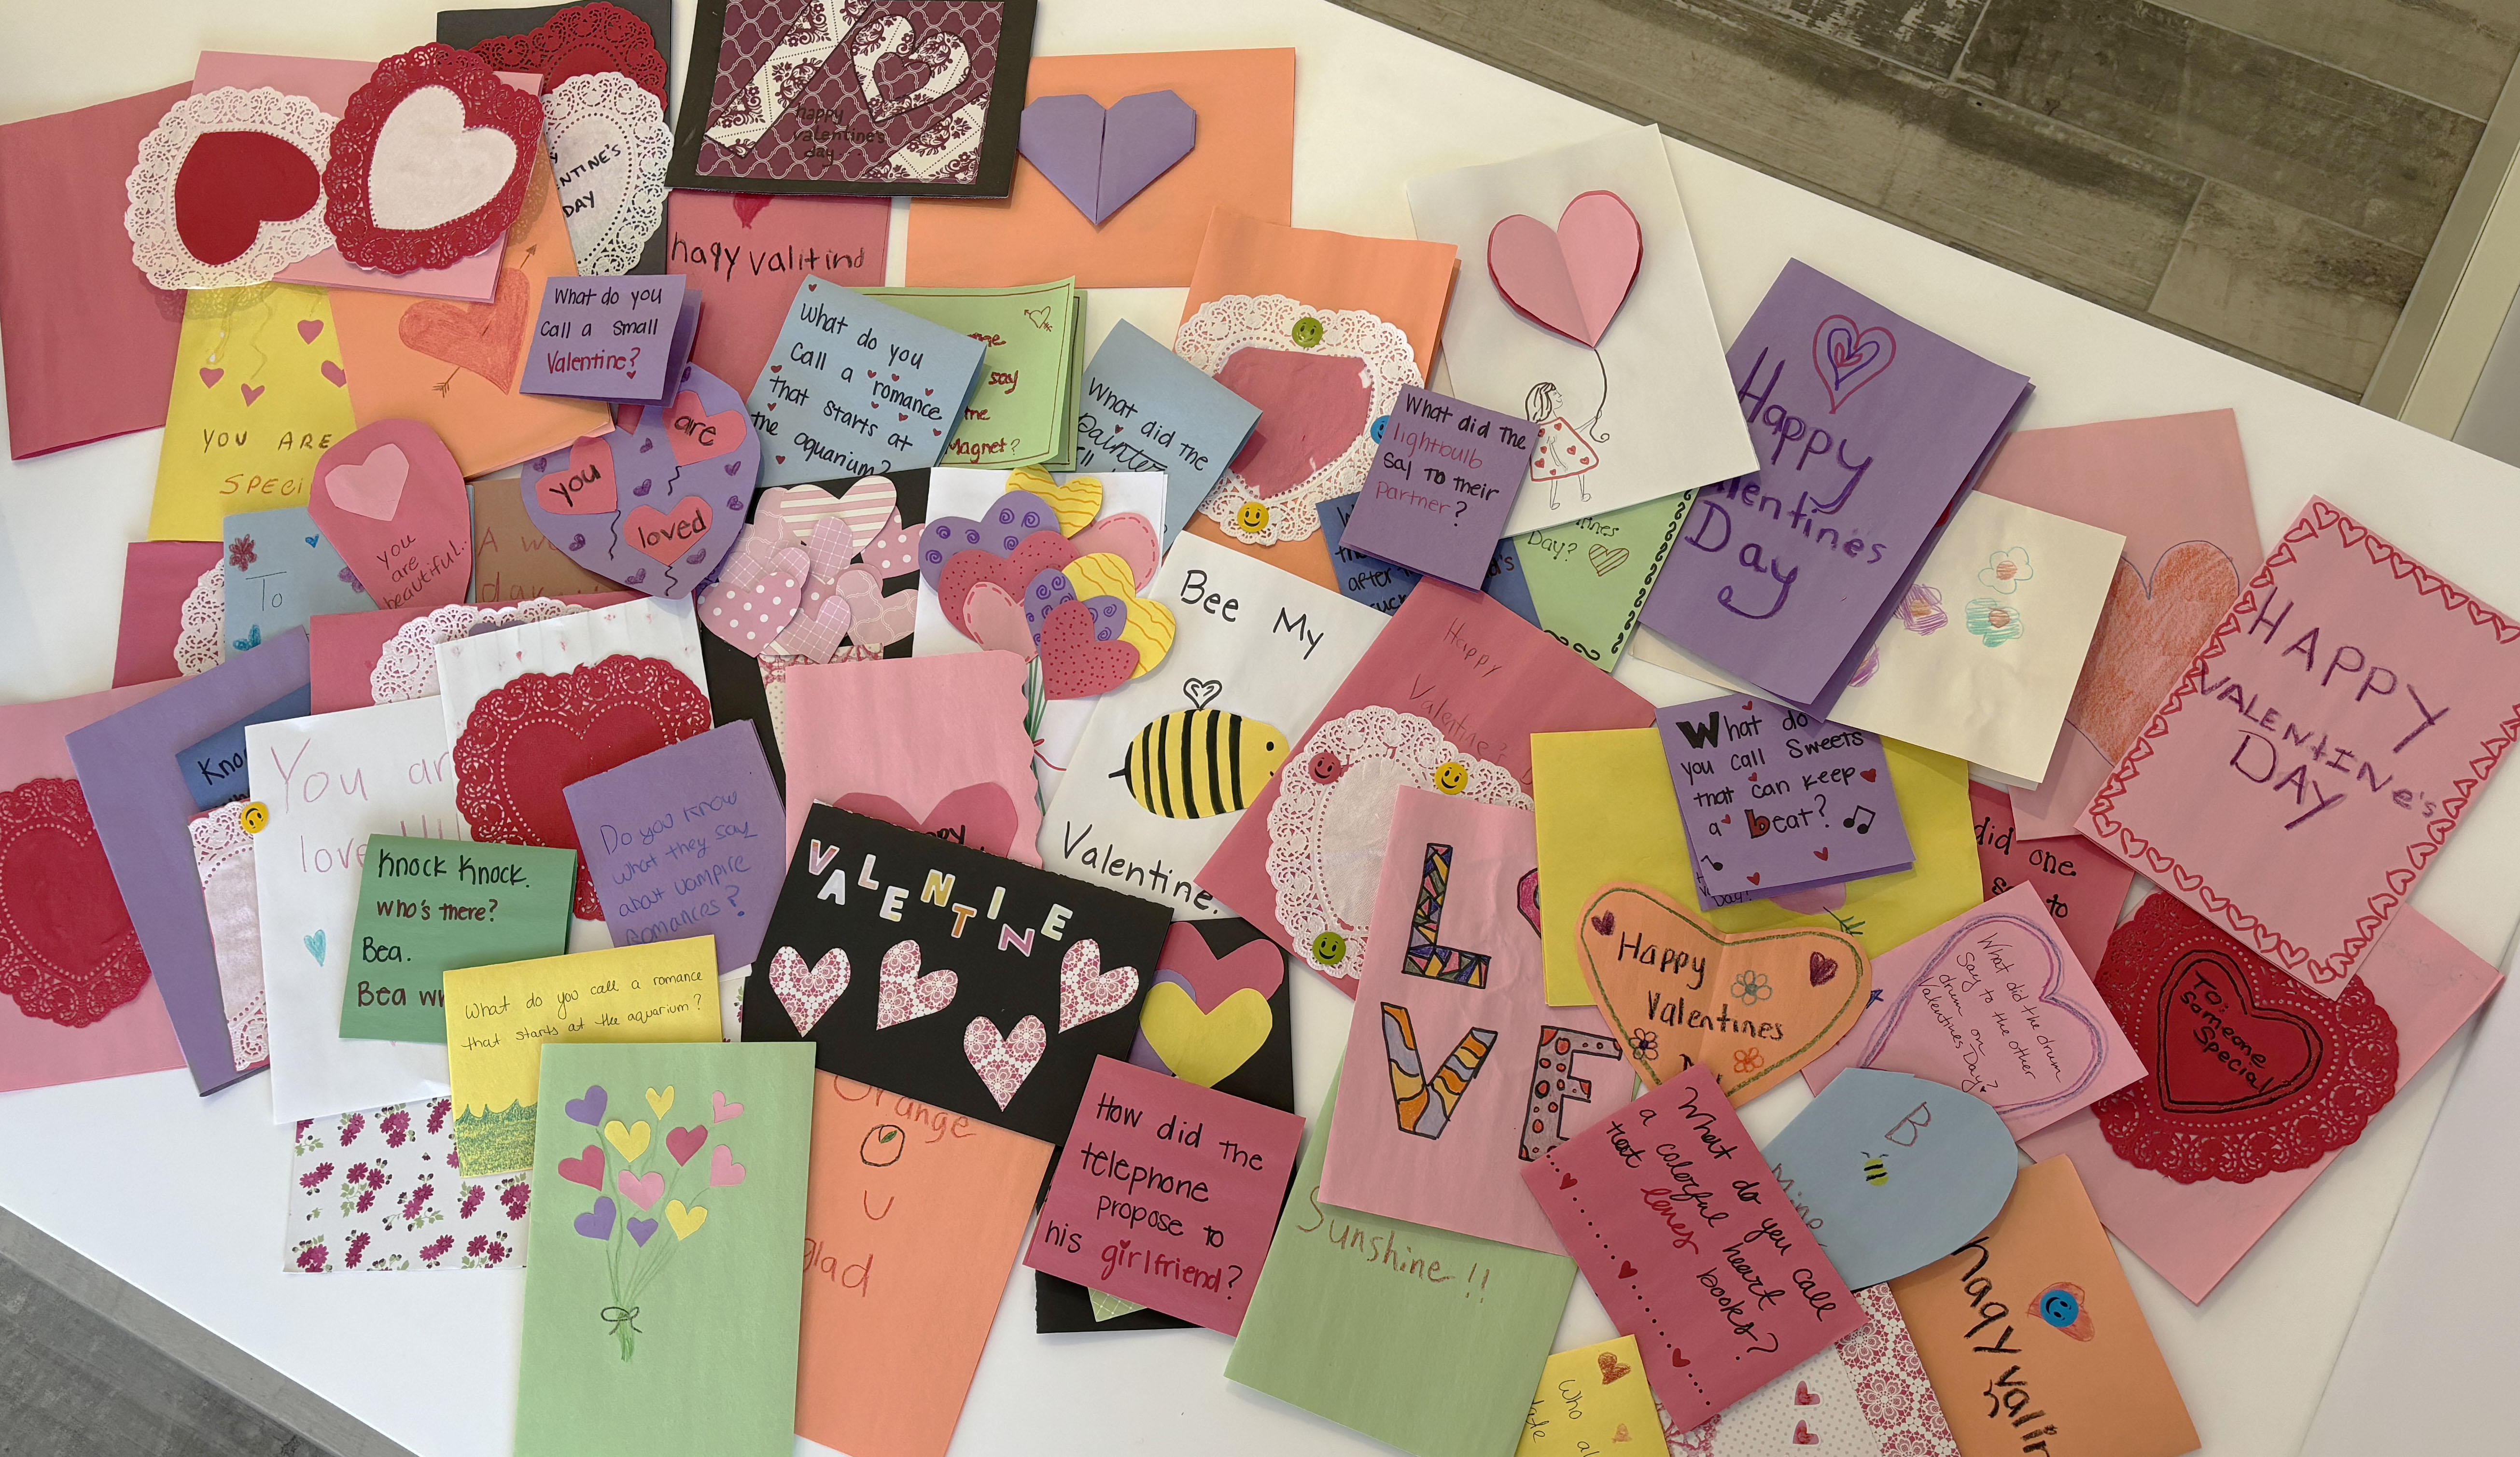 BTX employees made Valentine's Day cards for Lord Chamberlain Nursing Home residents.